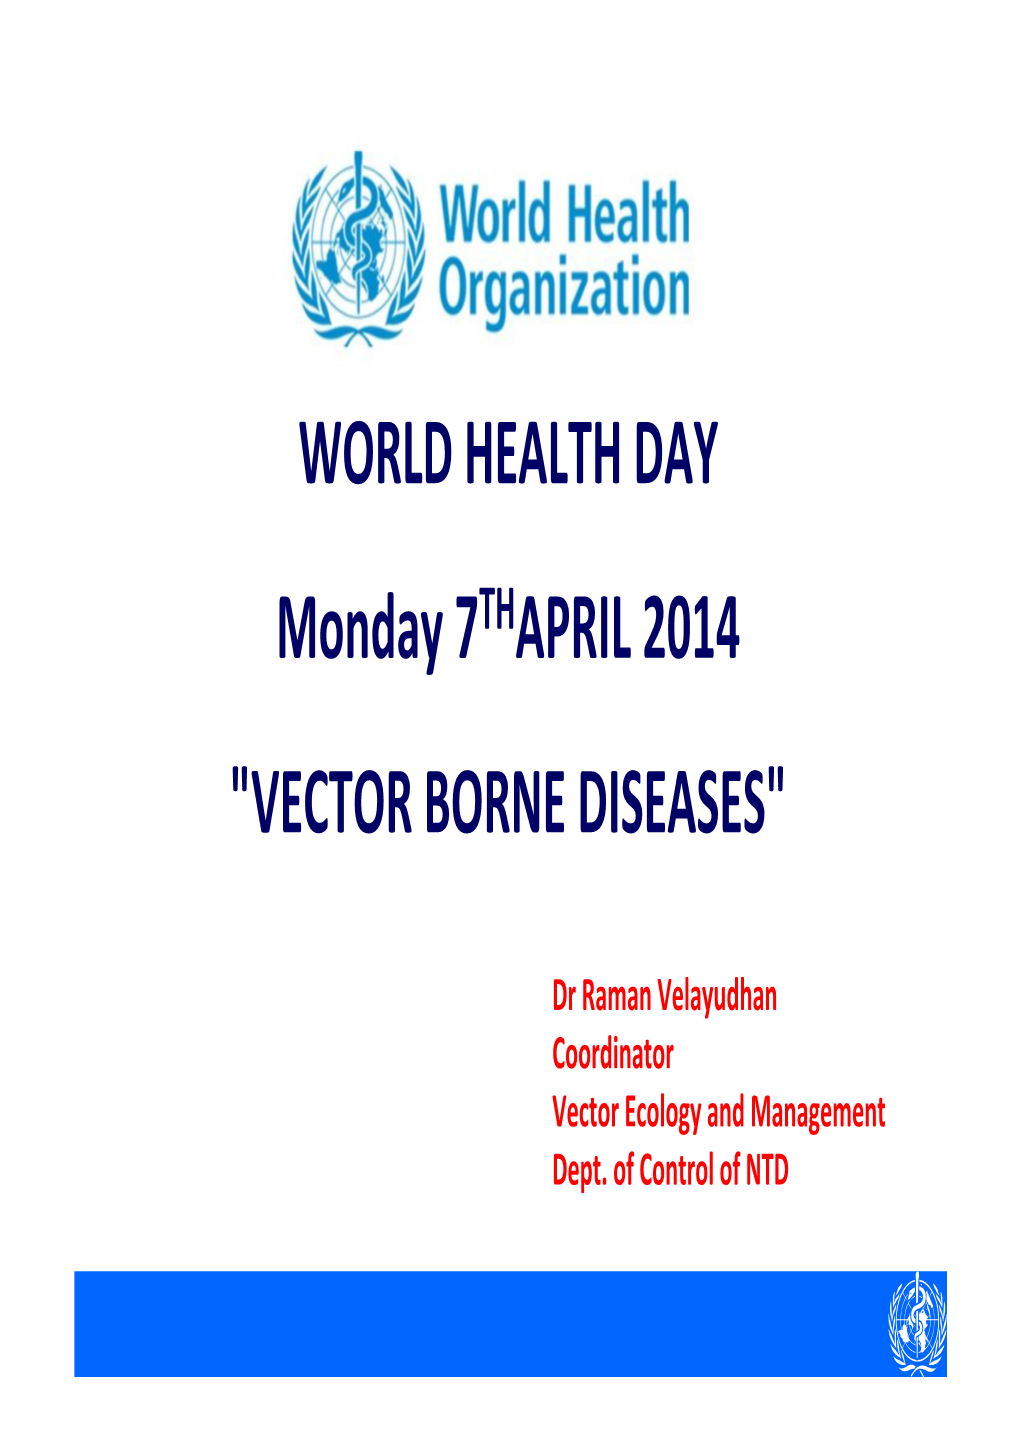 WORLD HEALTH DAY Monday 7THAPRIL 2014 "VECTOR BORNE DISEASES"